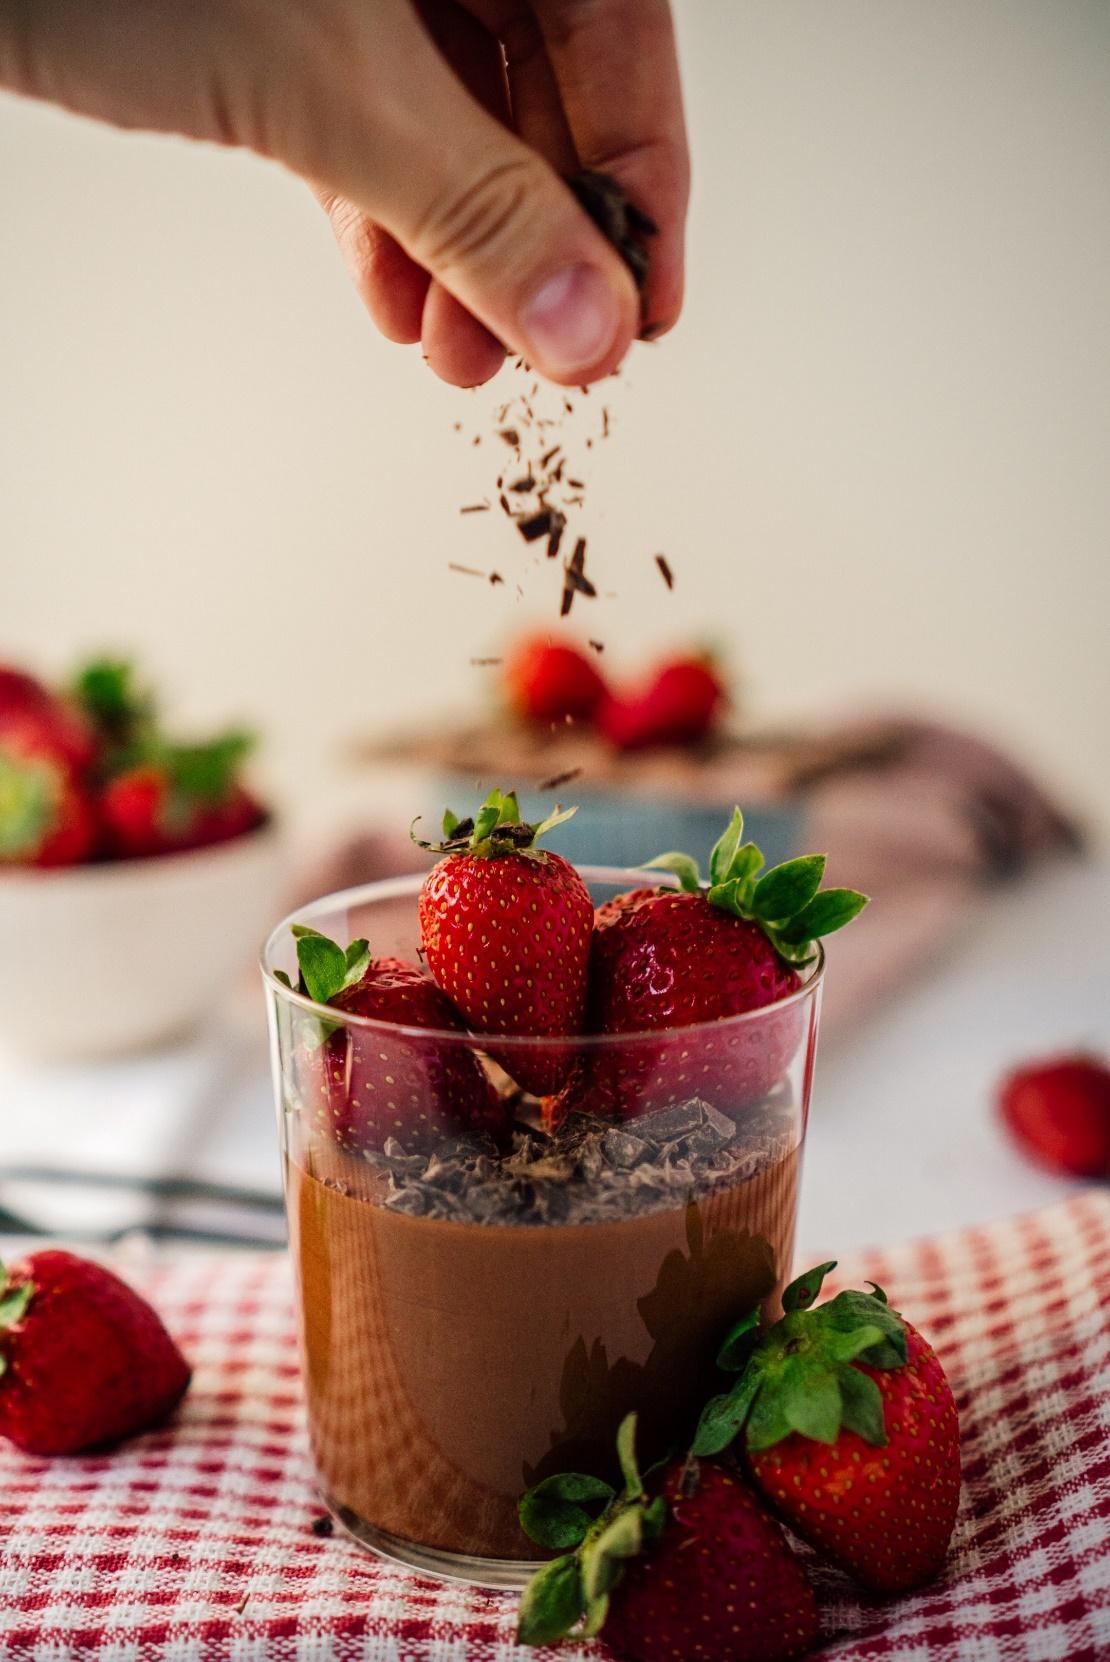 The Real Food Academy Miami chocolate mousse recipe.